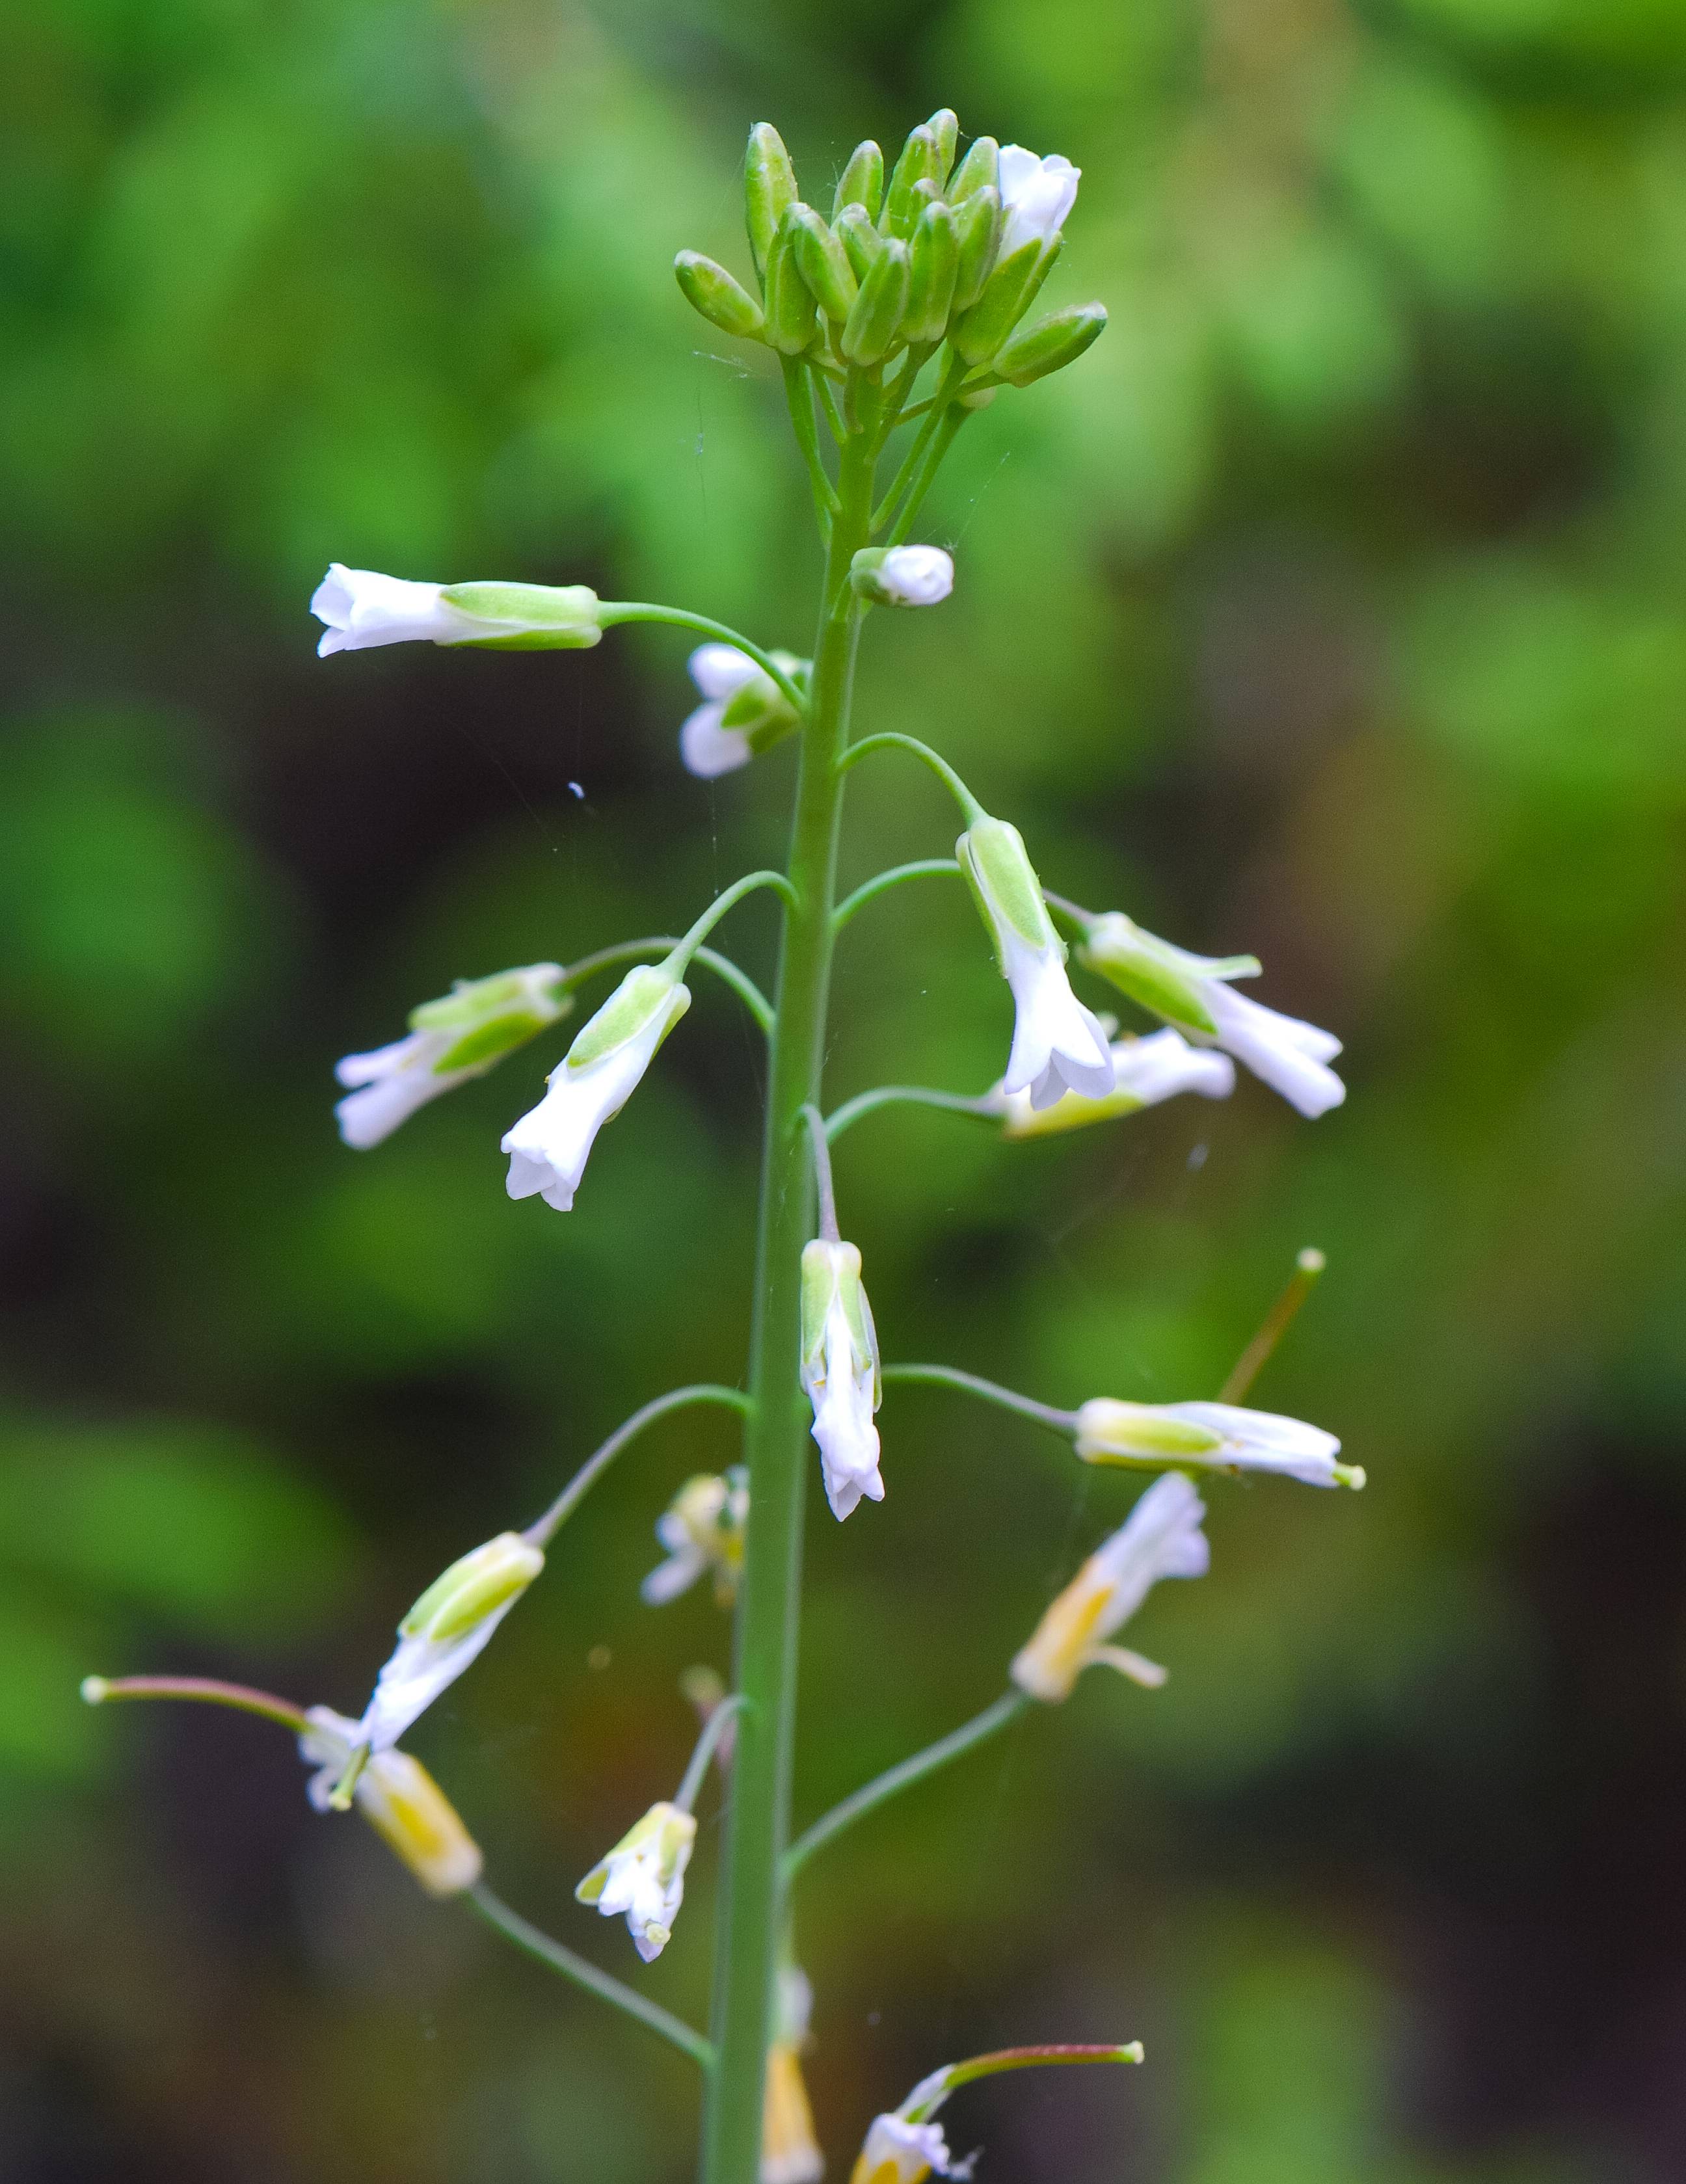 white flowers and white-green buds on green stems
